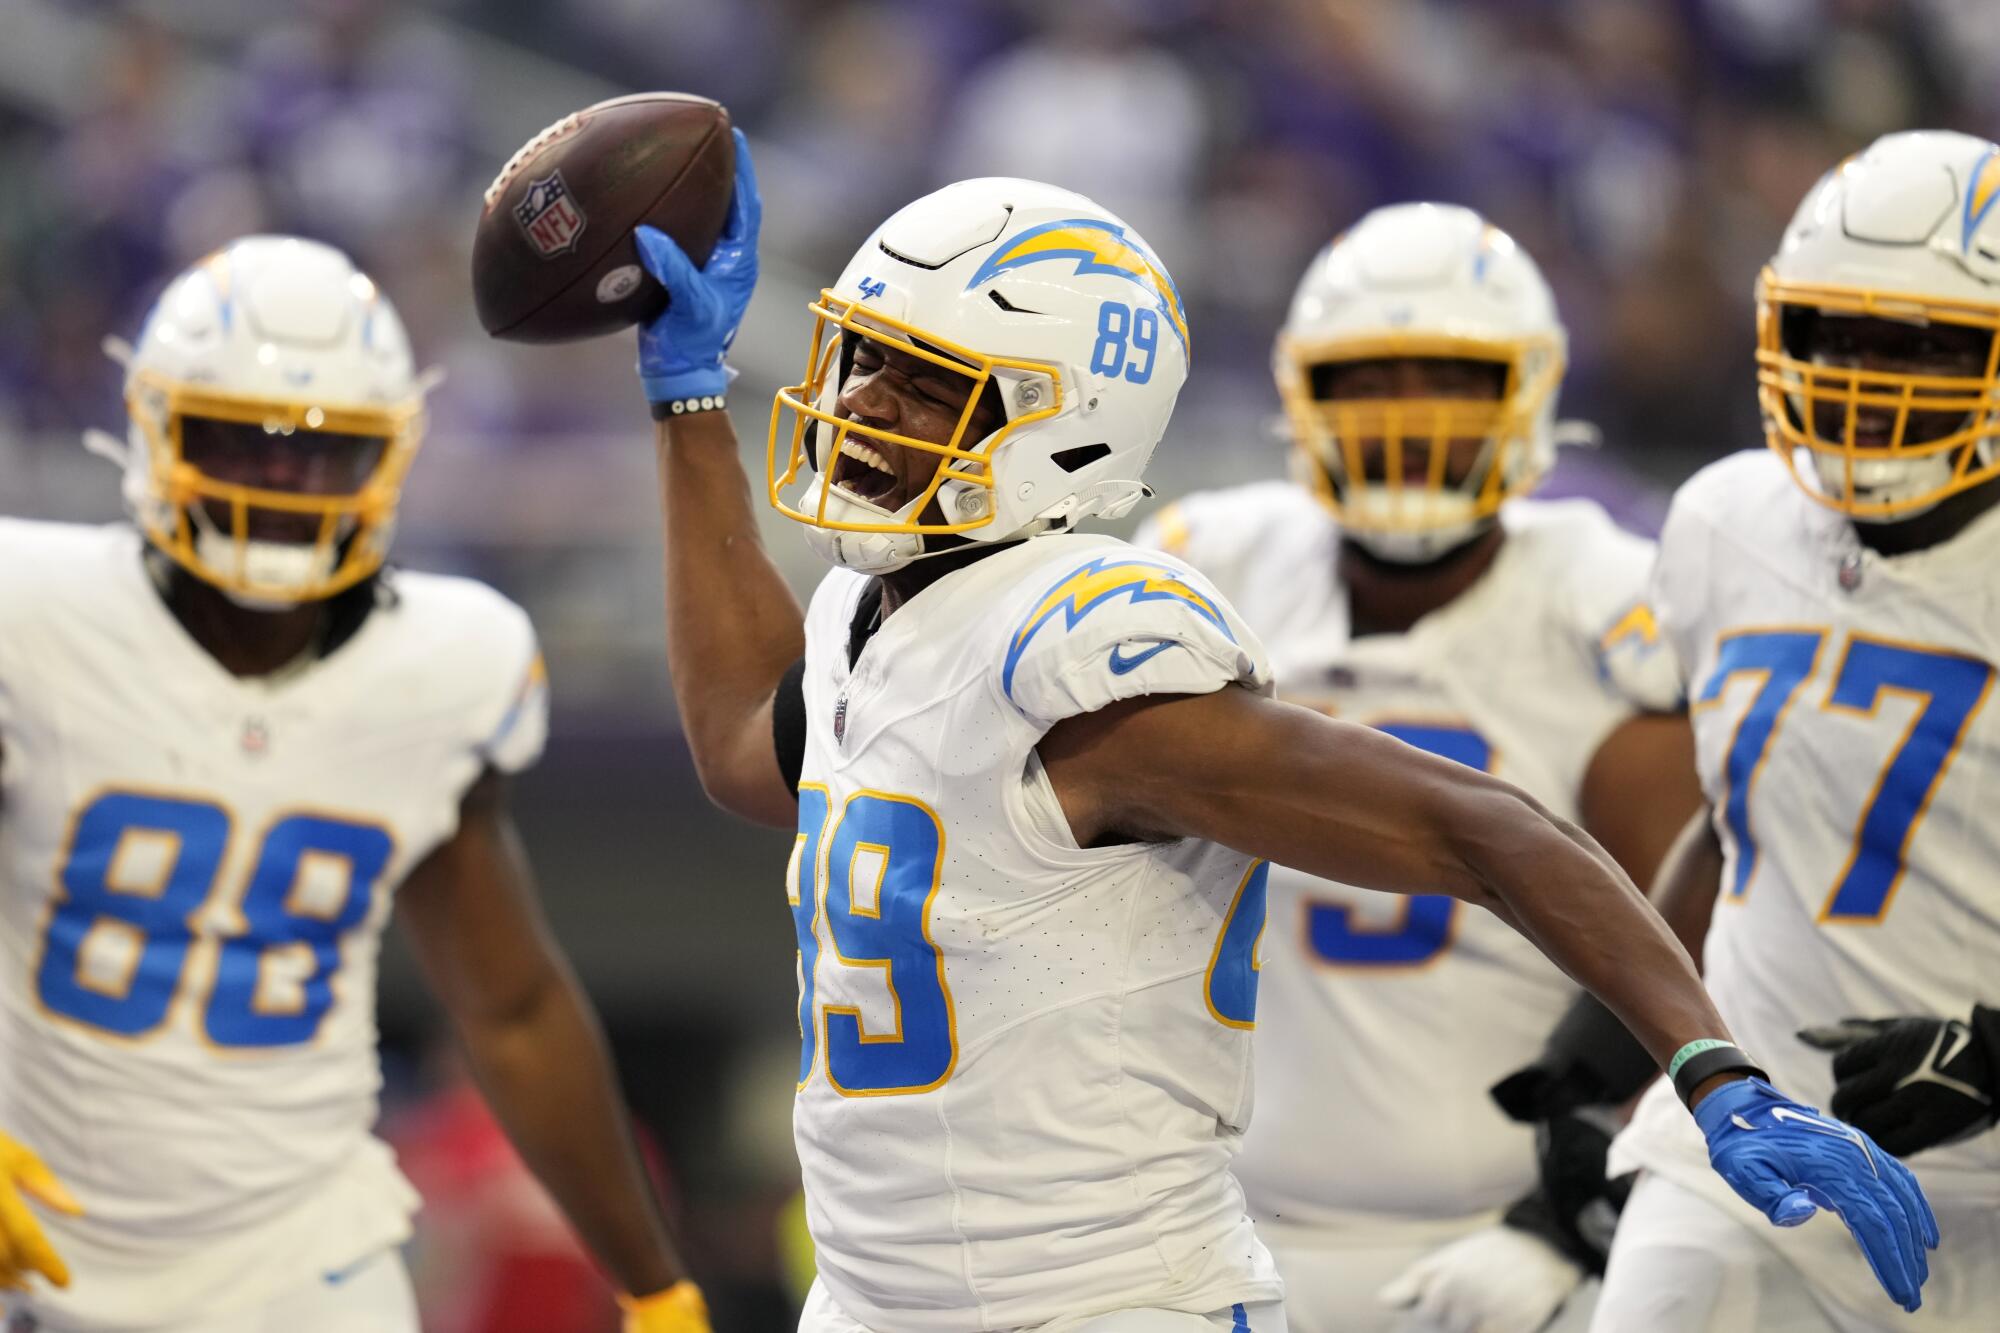 Did Chargers save their season with win over Vikings?, Speak